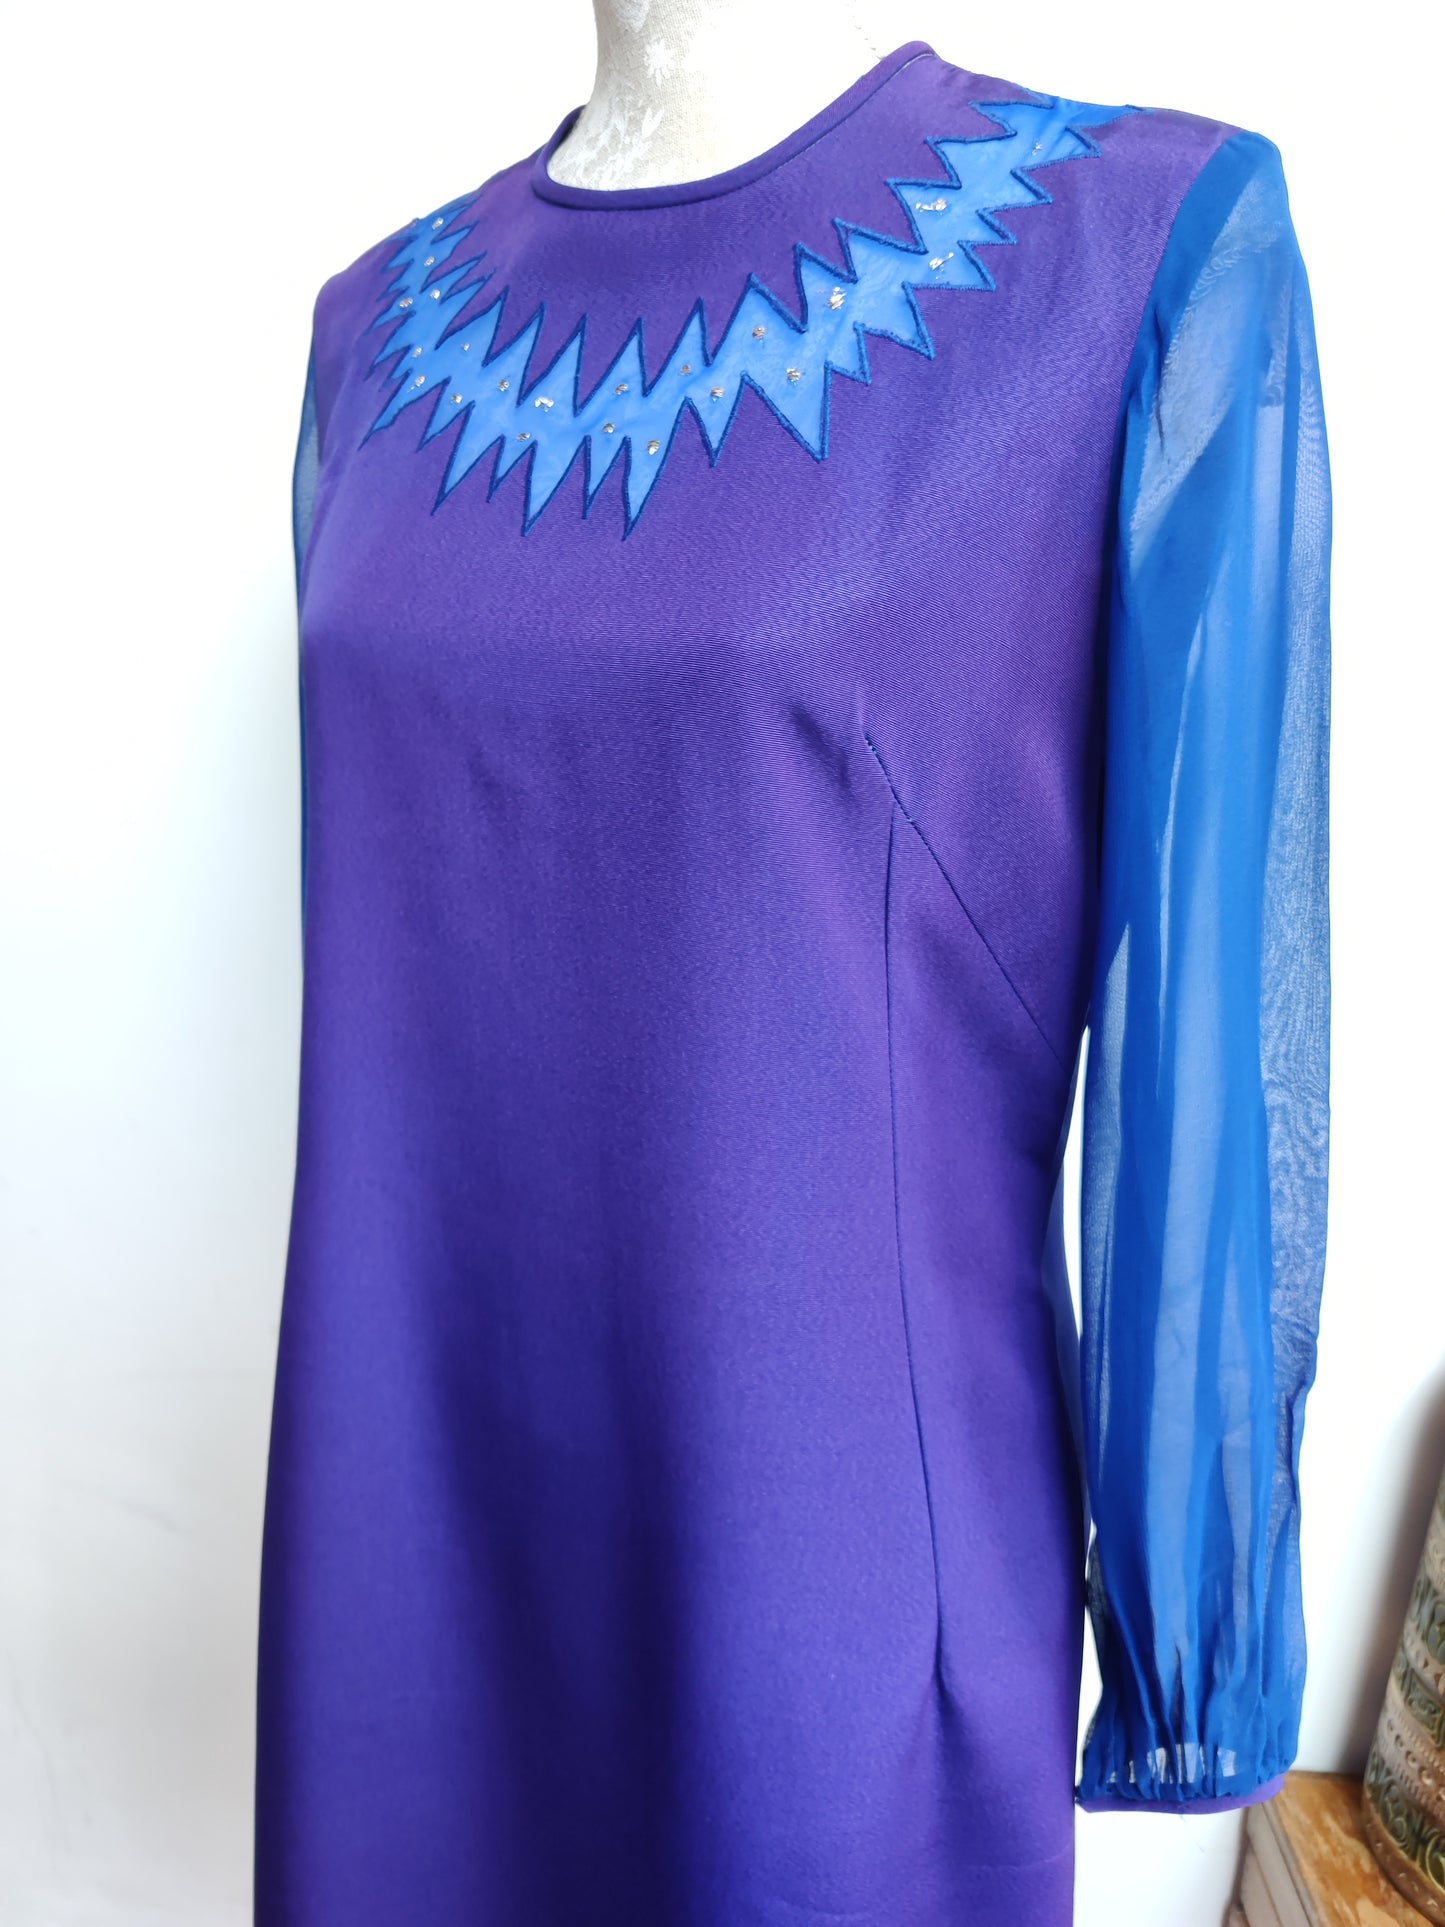 stunning dress with chiffon sleeves in blue and purple.